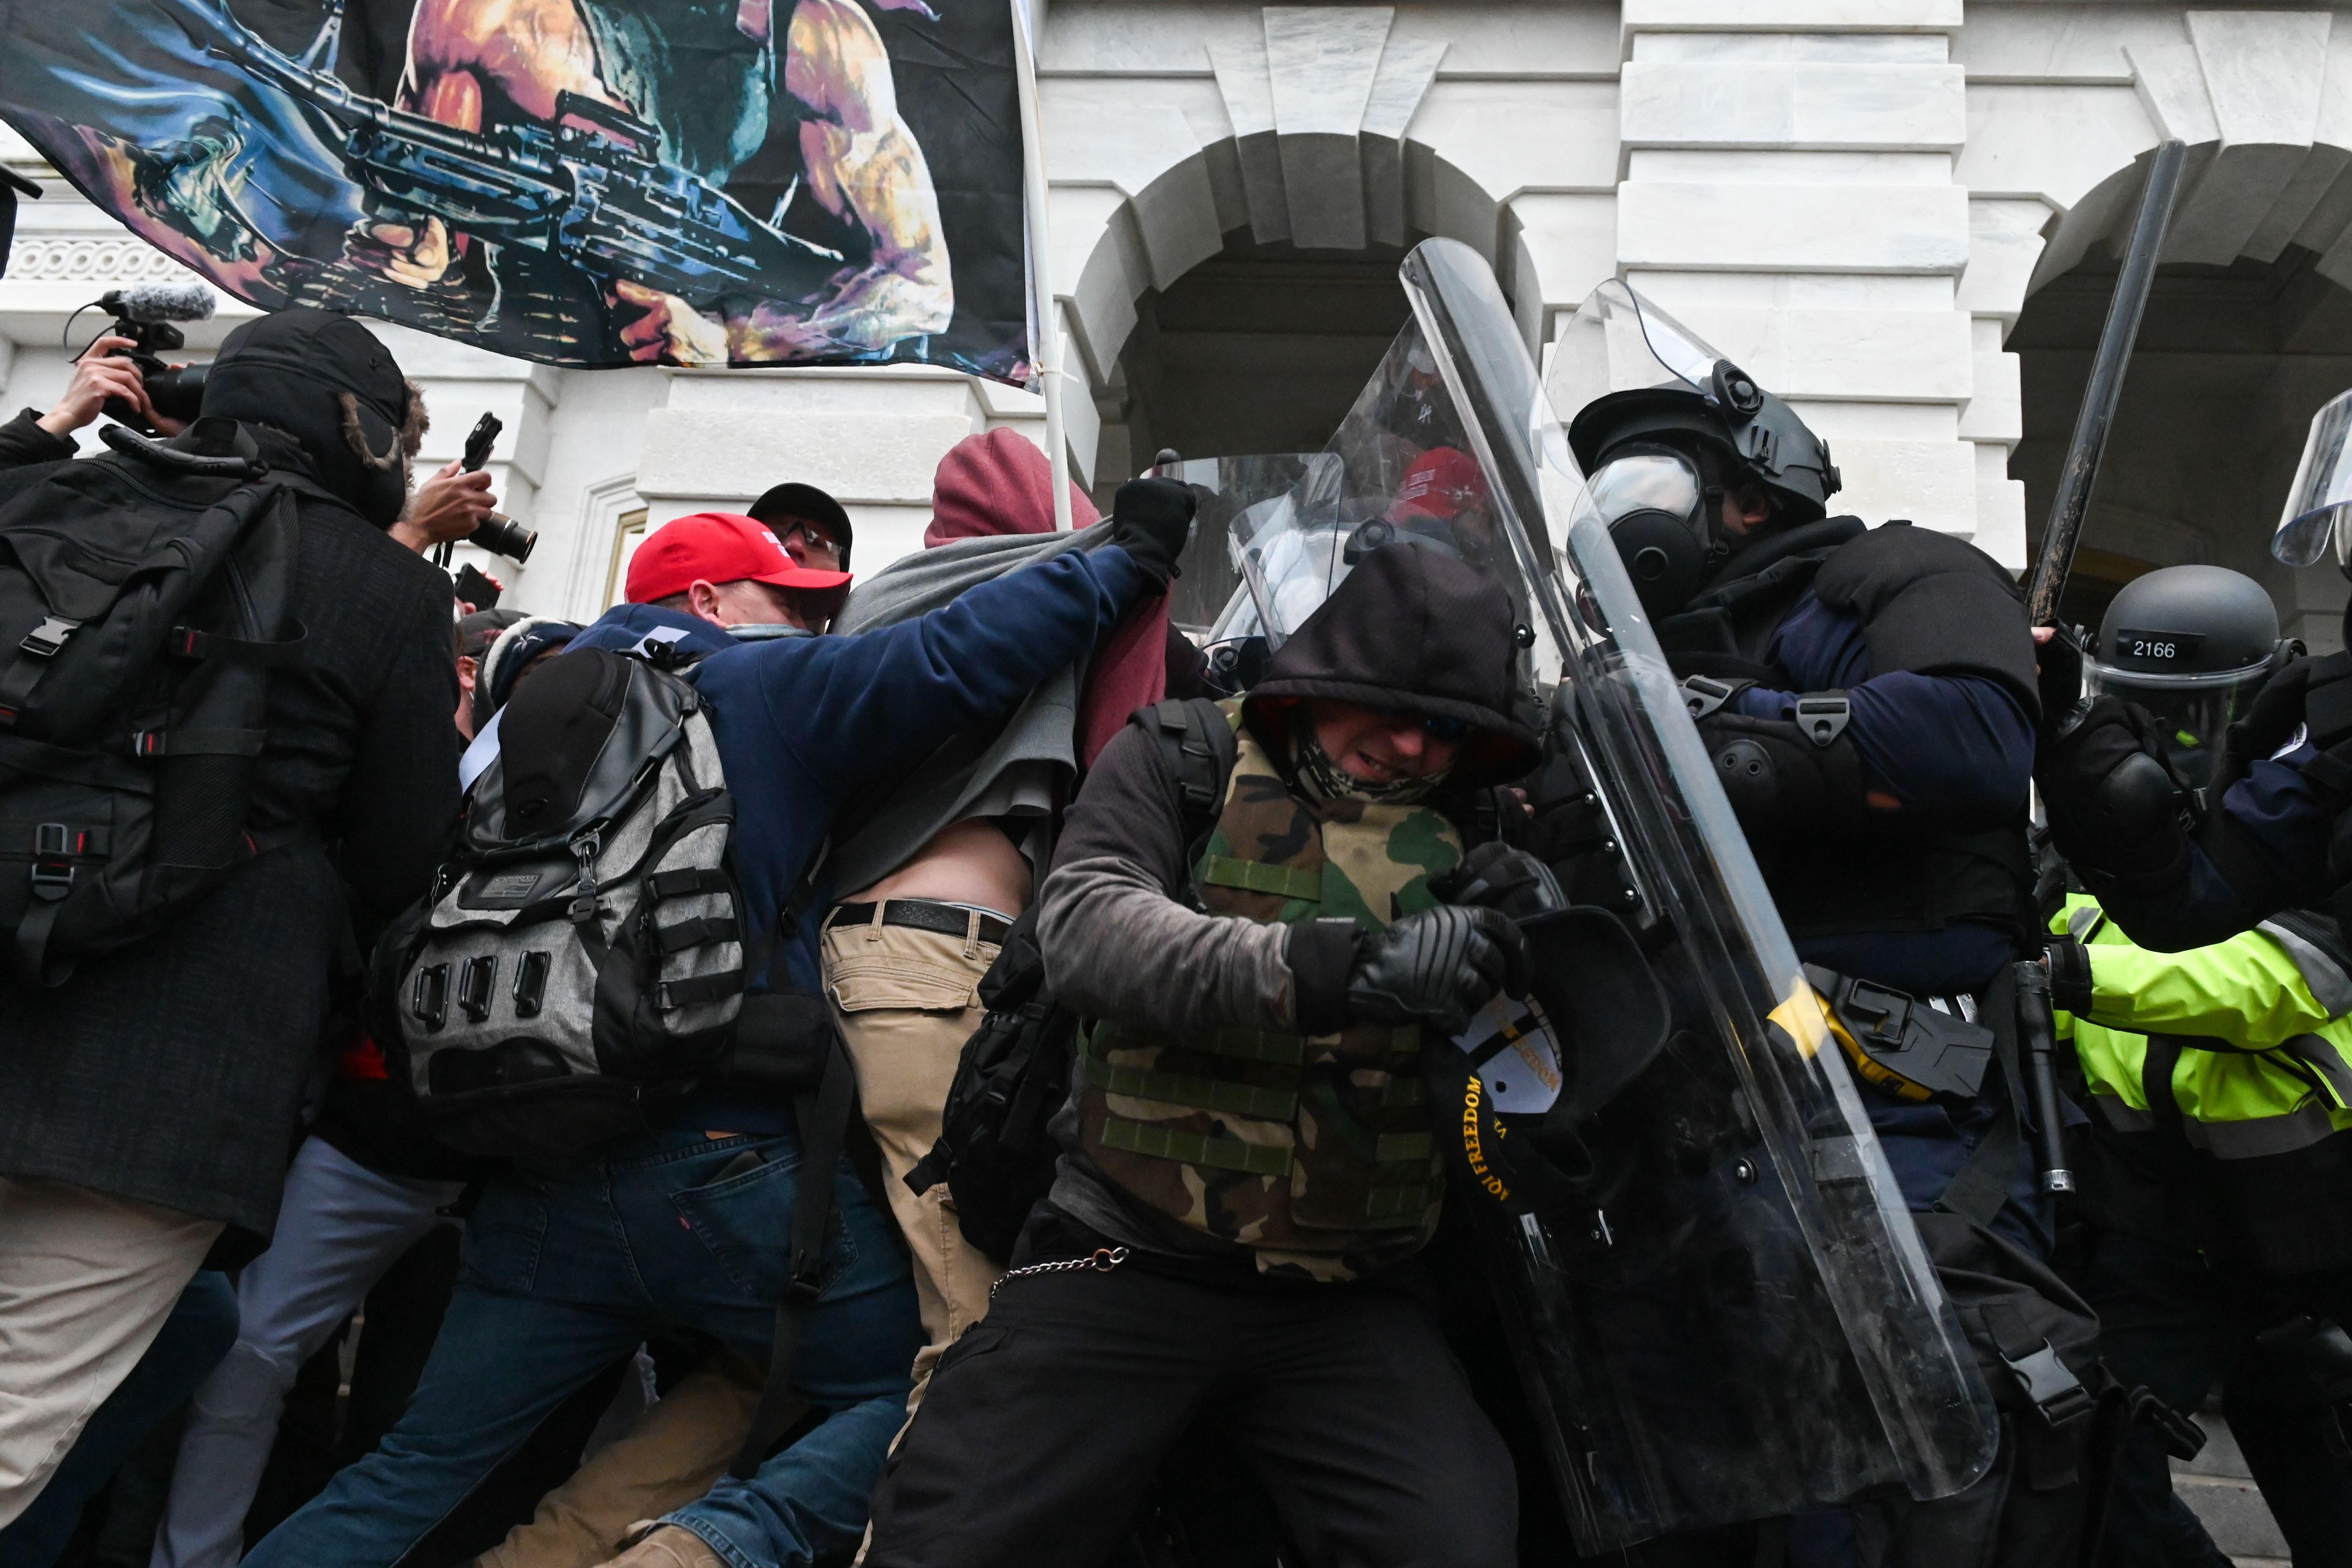 Pro-Trump rioters clash with police in riot gear.